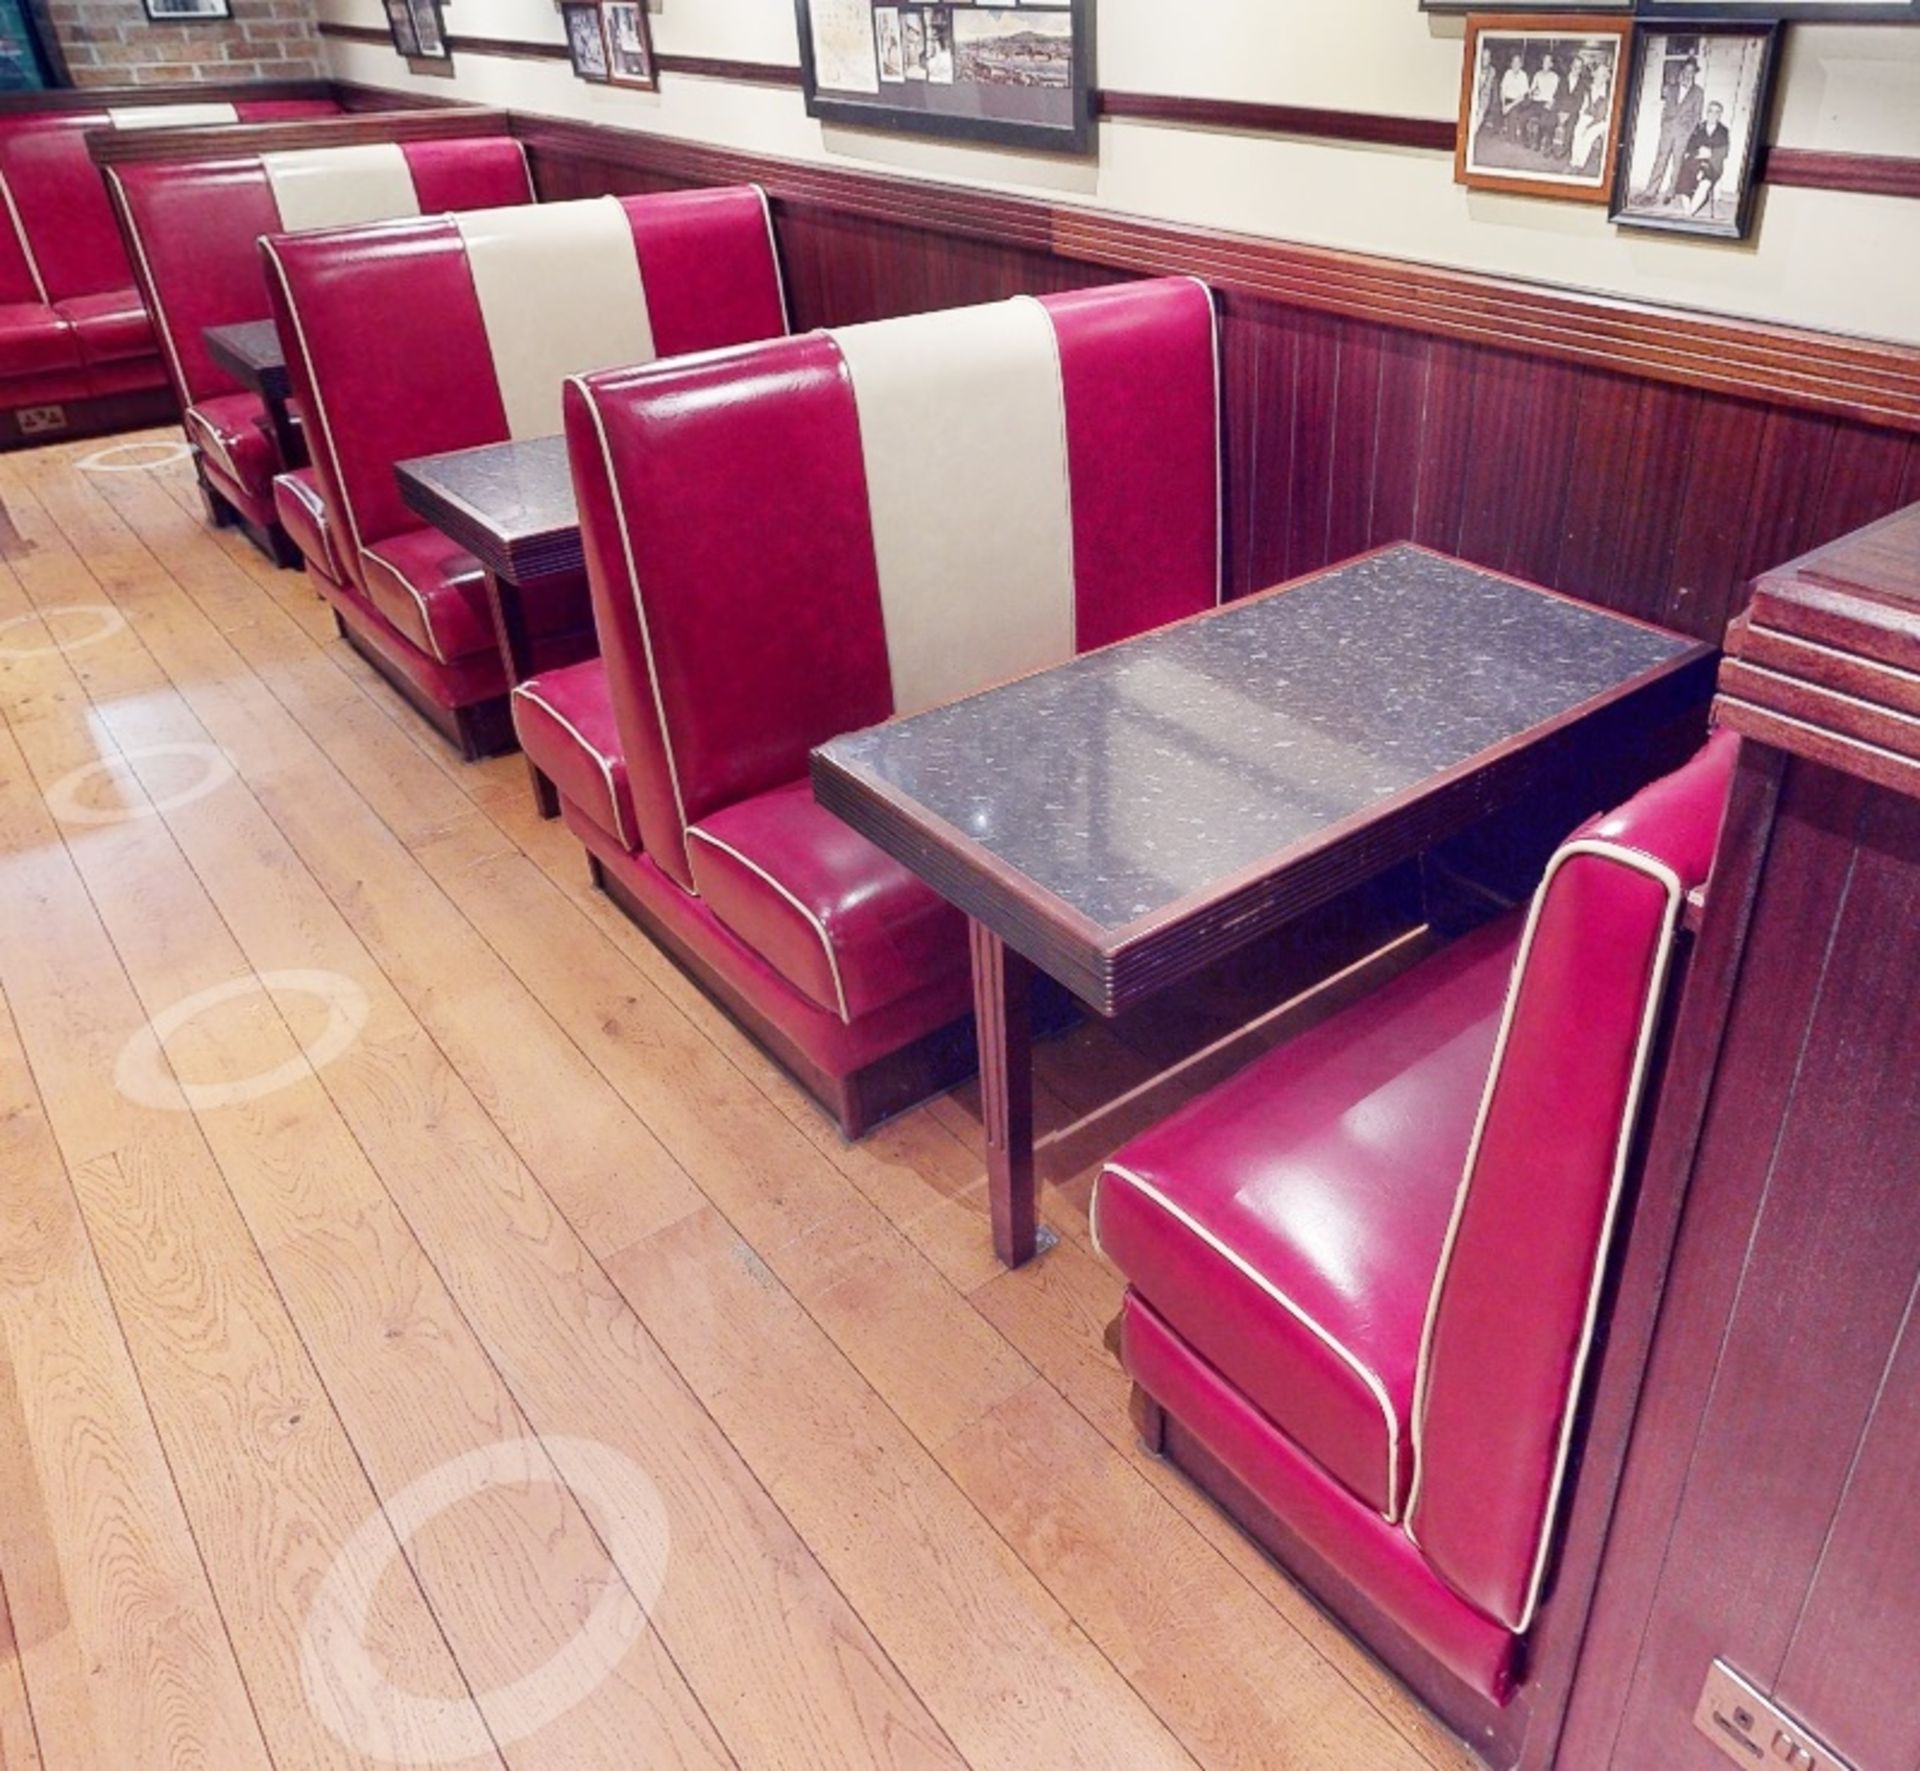 Selection of Double Seating Benches and Dining Tables to Seat Upto 12 Persons - Retro 1950's